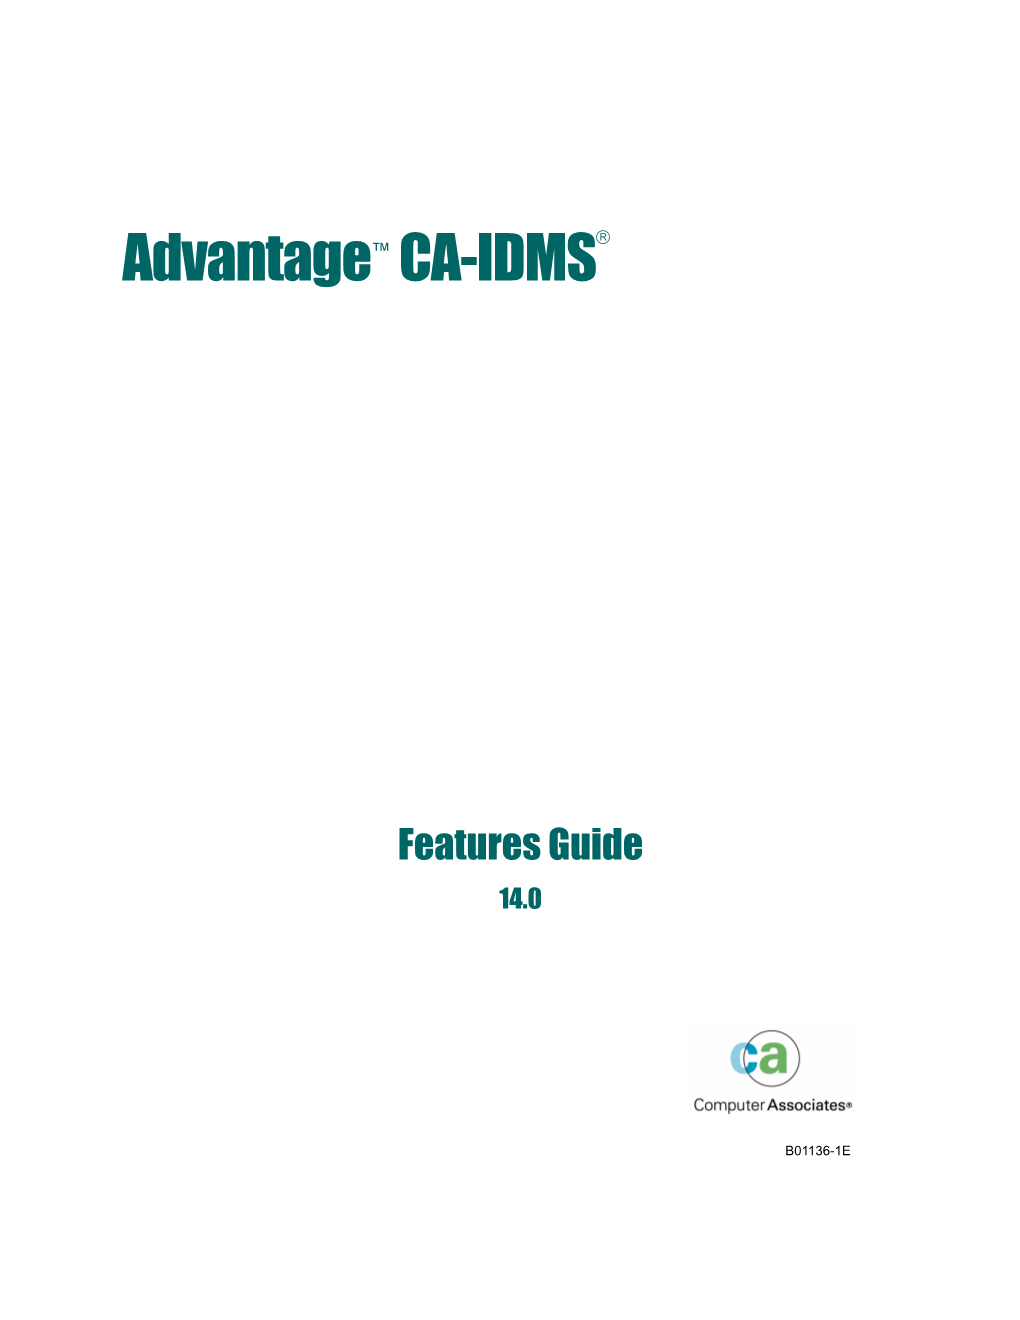 Advantage CA-IDMS 14.0 Features Guide